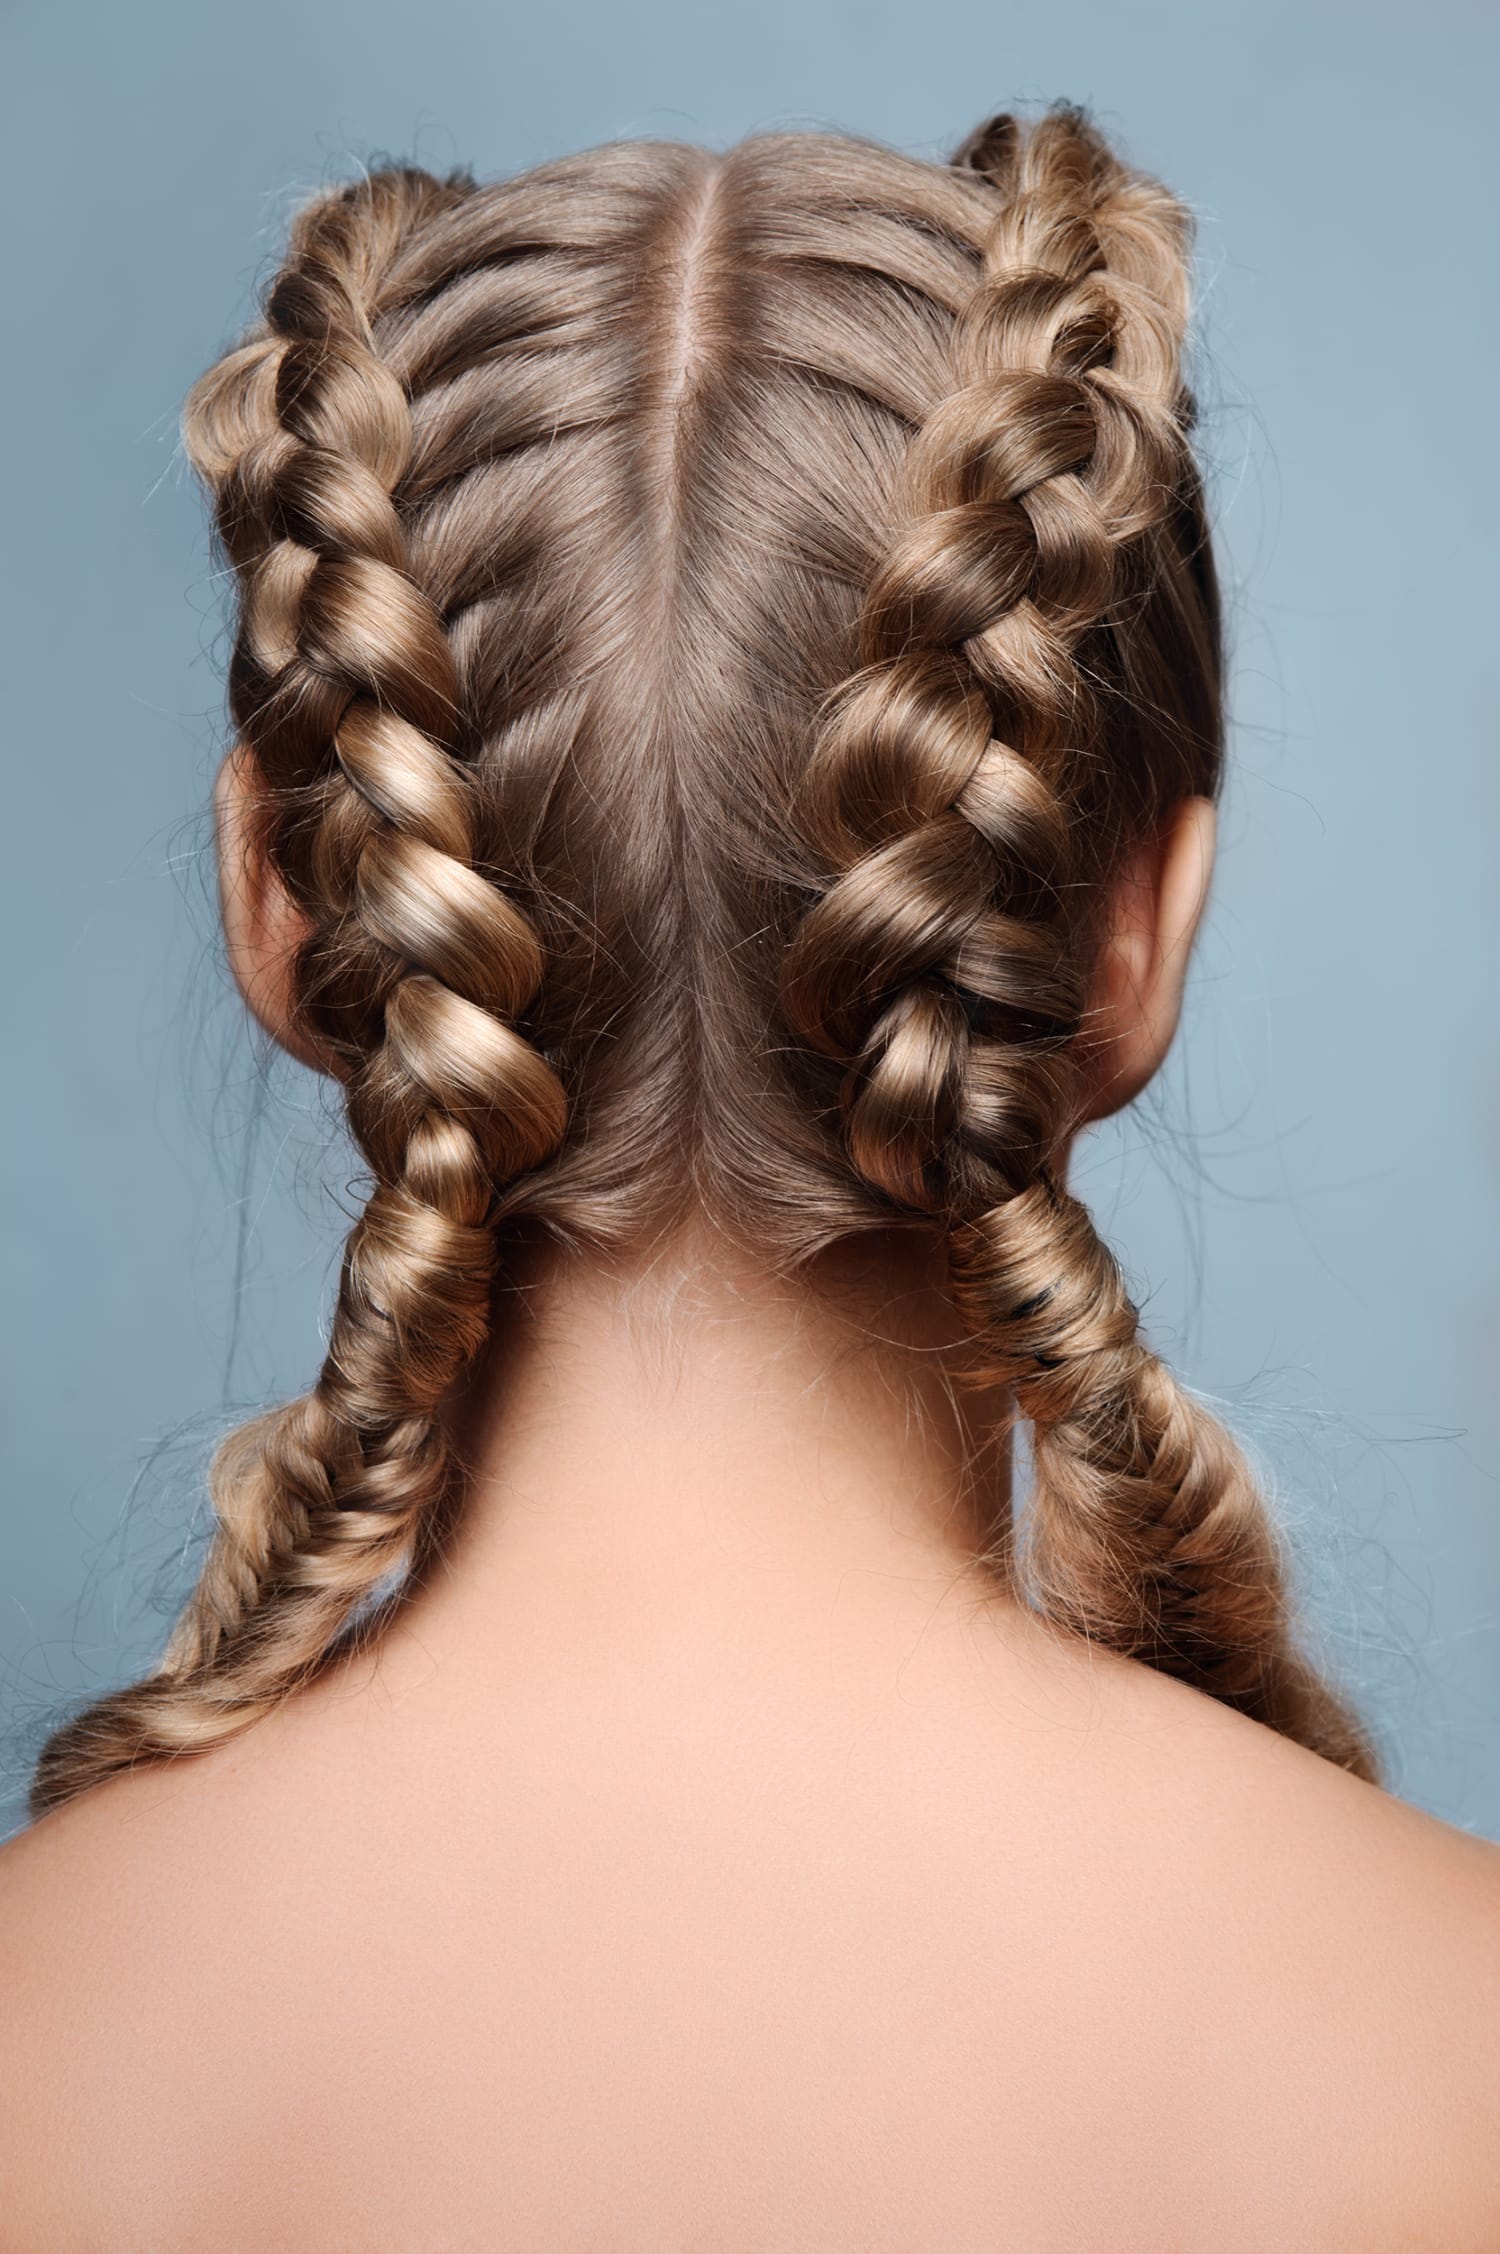 6 Steps To A Braided Bun | French braid hairstyles, Reverse french braids,  Bow hairstyle